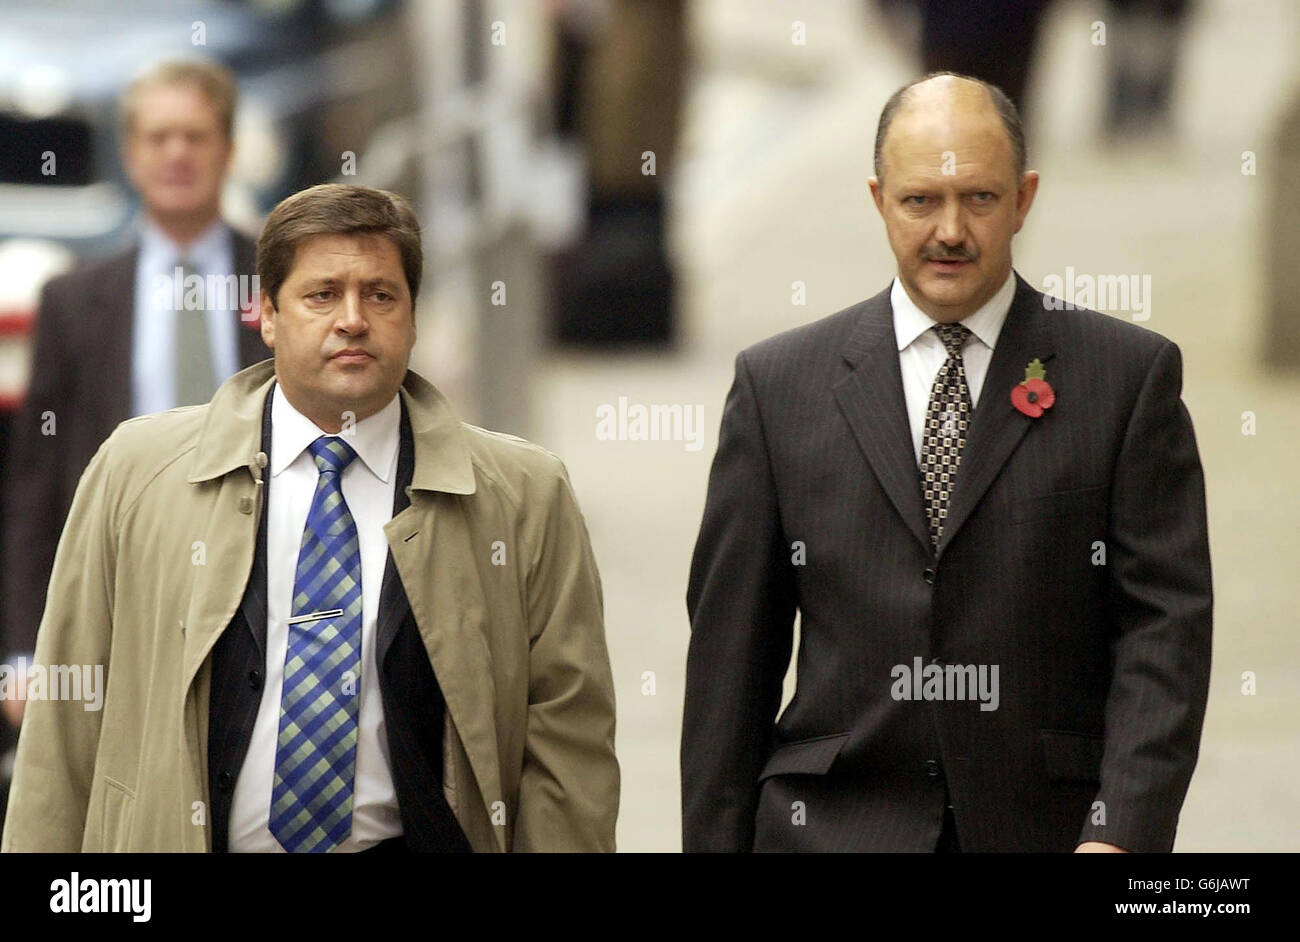 Detective Chief Inspector Andy Hebb (left) and Temporary Detective Chief Superintendent Chris Stevenson (right) arrive at the Old Bailey, central London, for the start of the Soham murder trial. The pair headed the Police investigation into the murder of the Soham school girls Holly Wells and Jessica Chapman. Stock Photo